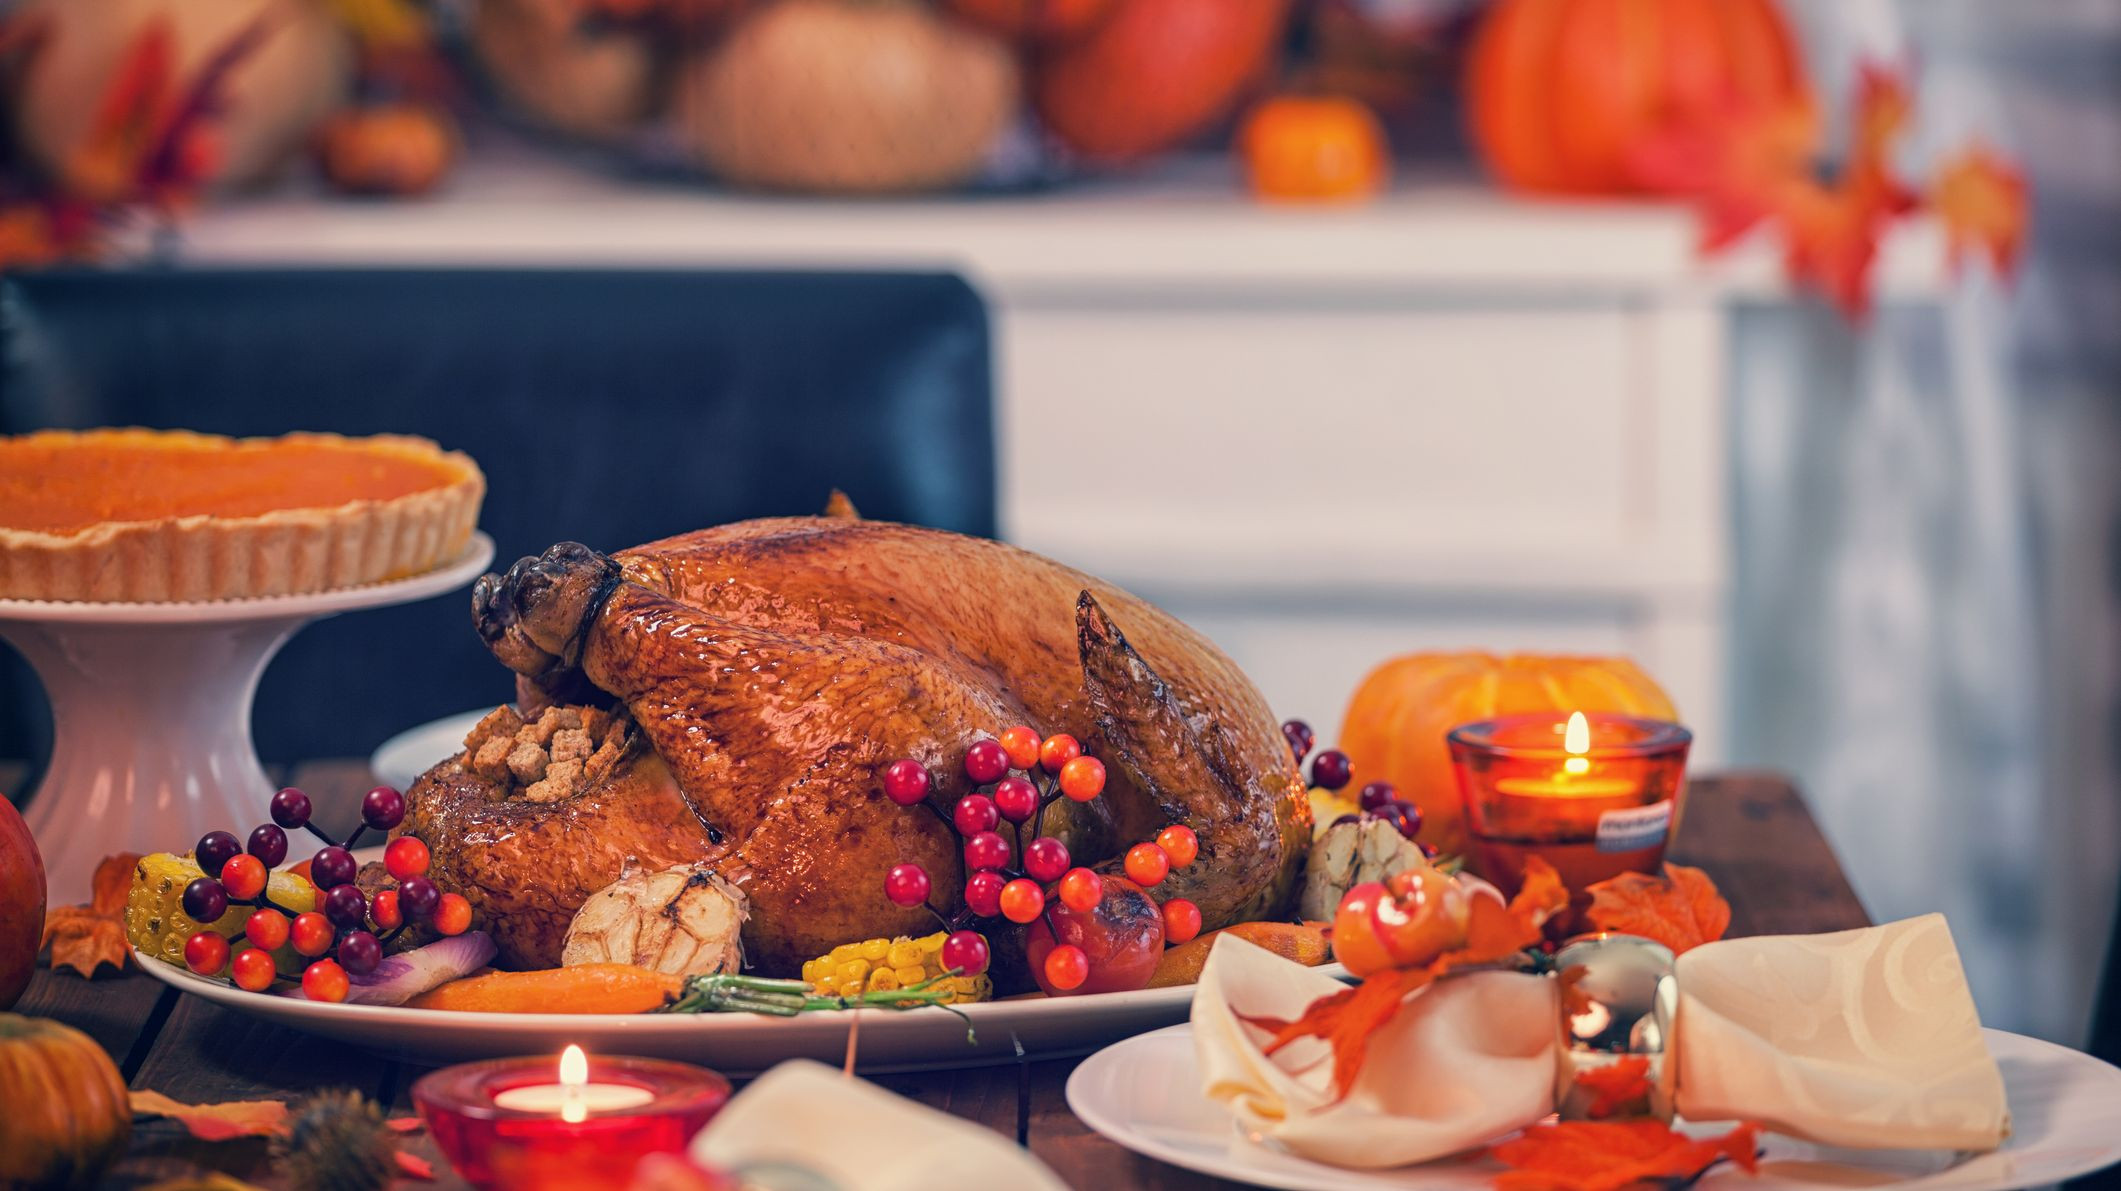 Why Do We Eat Turkey For Thanksgiving
 The History Behind Why We Eat 10 Dishes at Thanksgiving